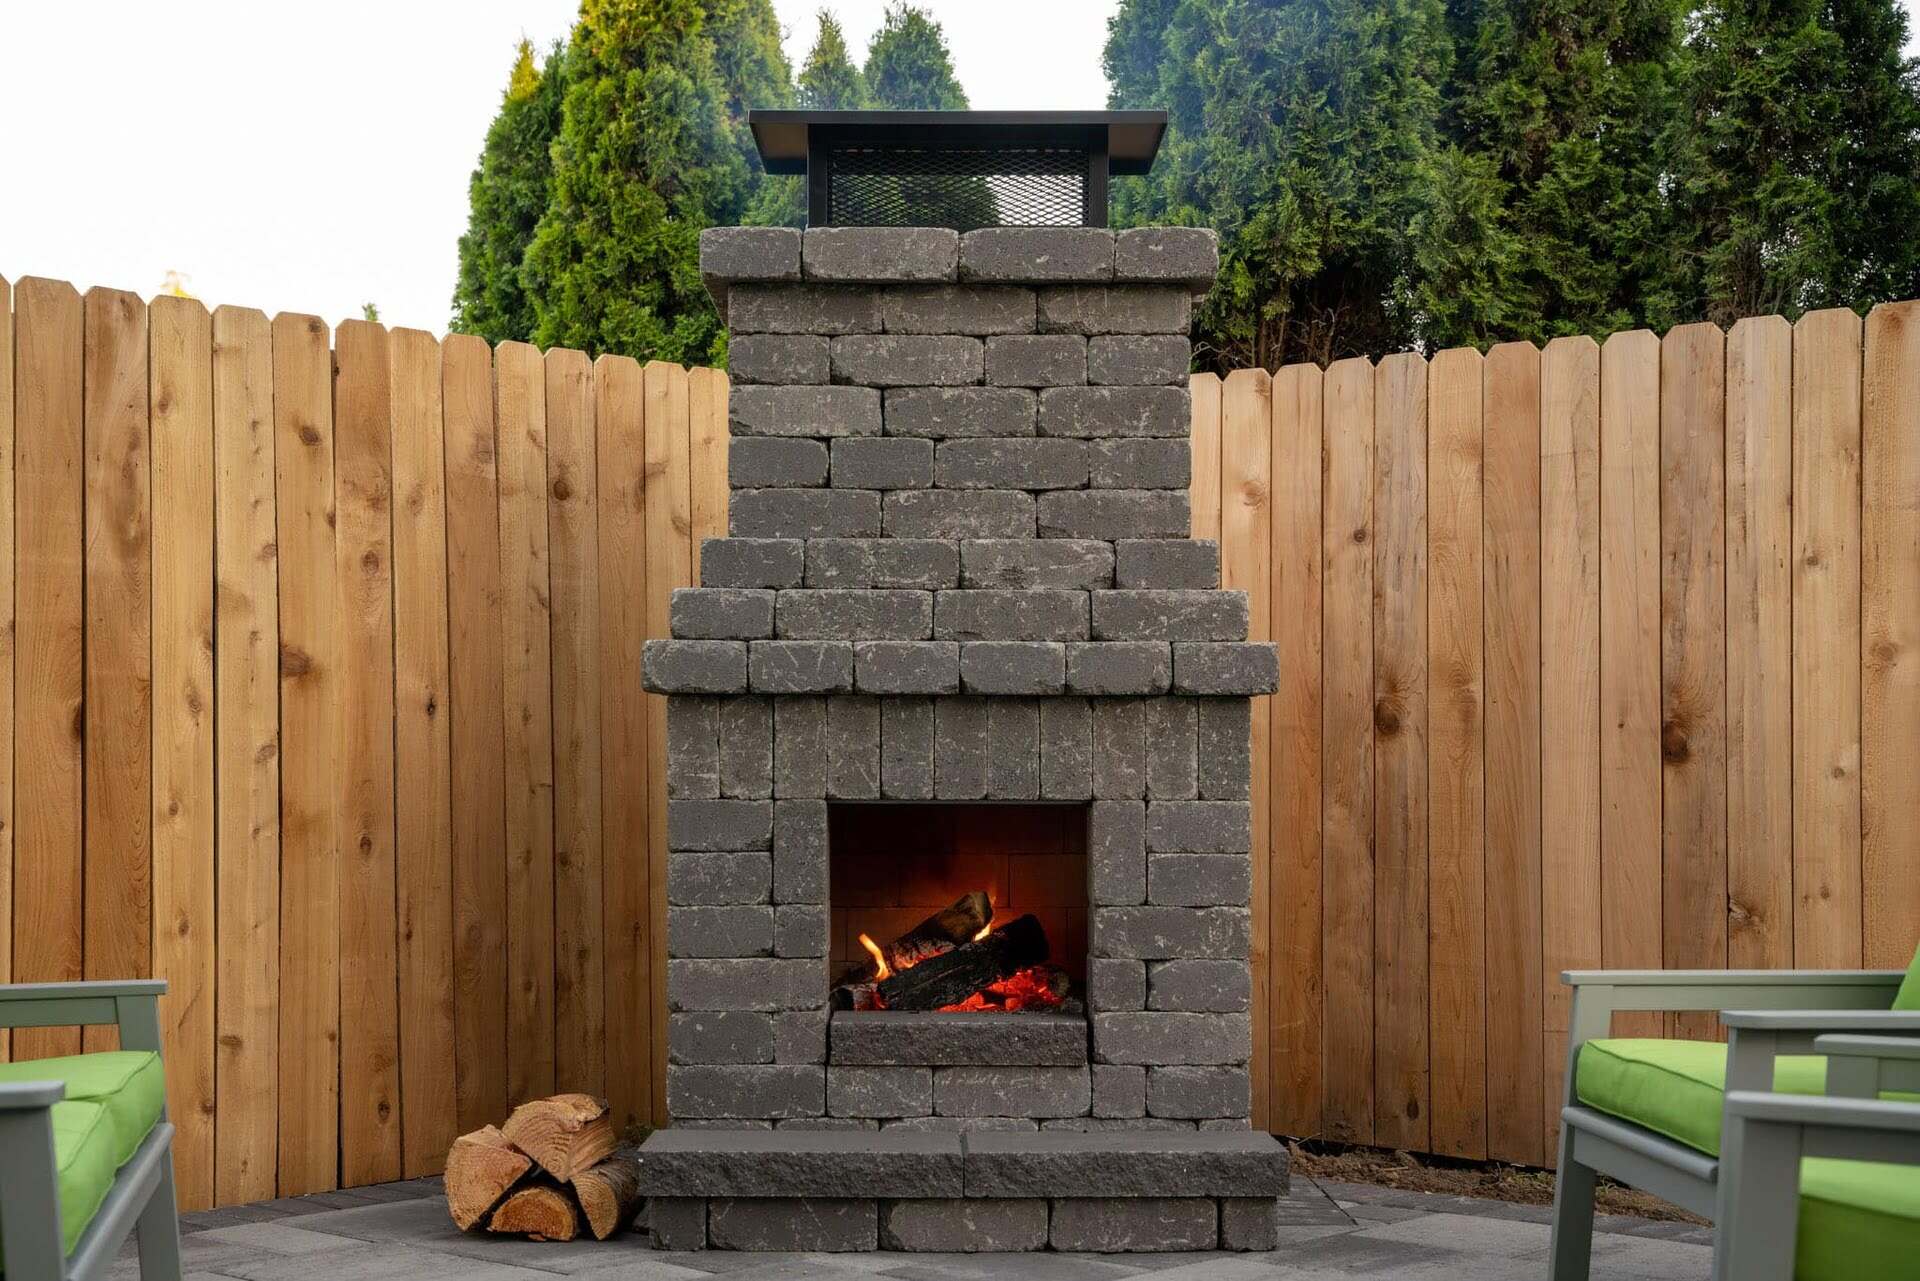 How To Make A Brick Outdoor Fireplace